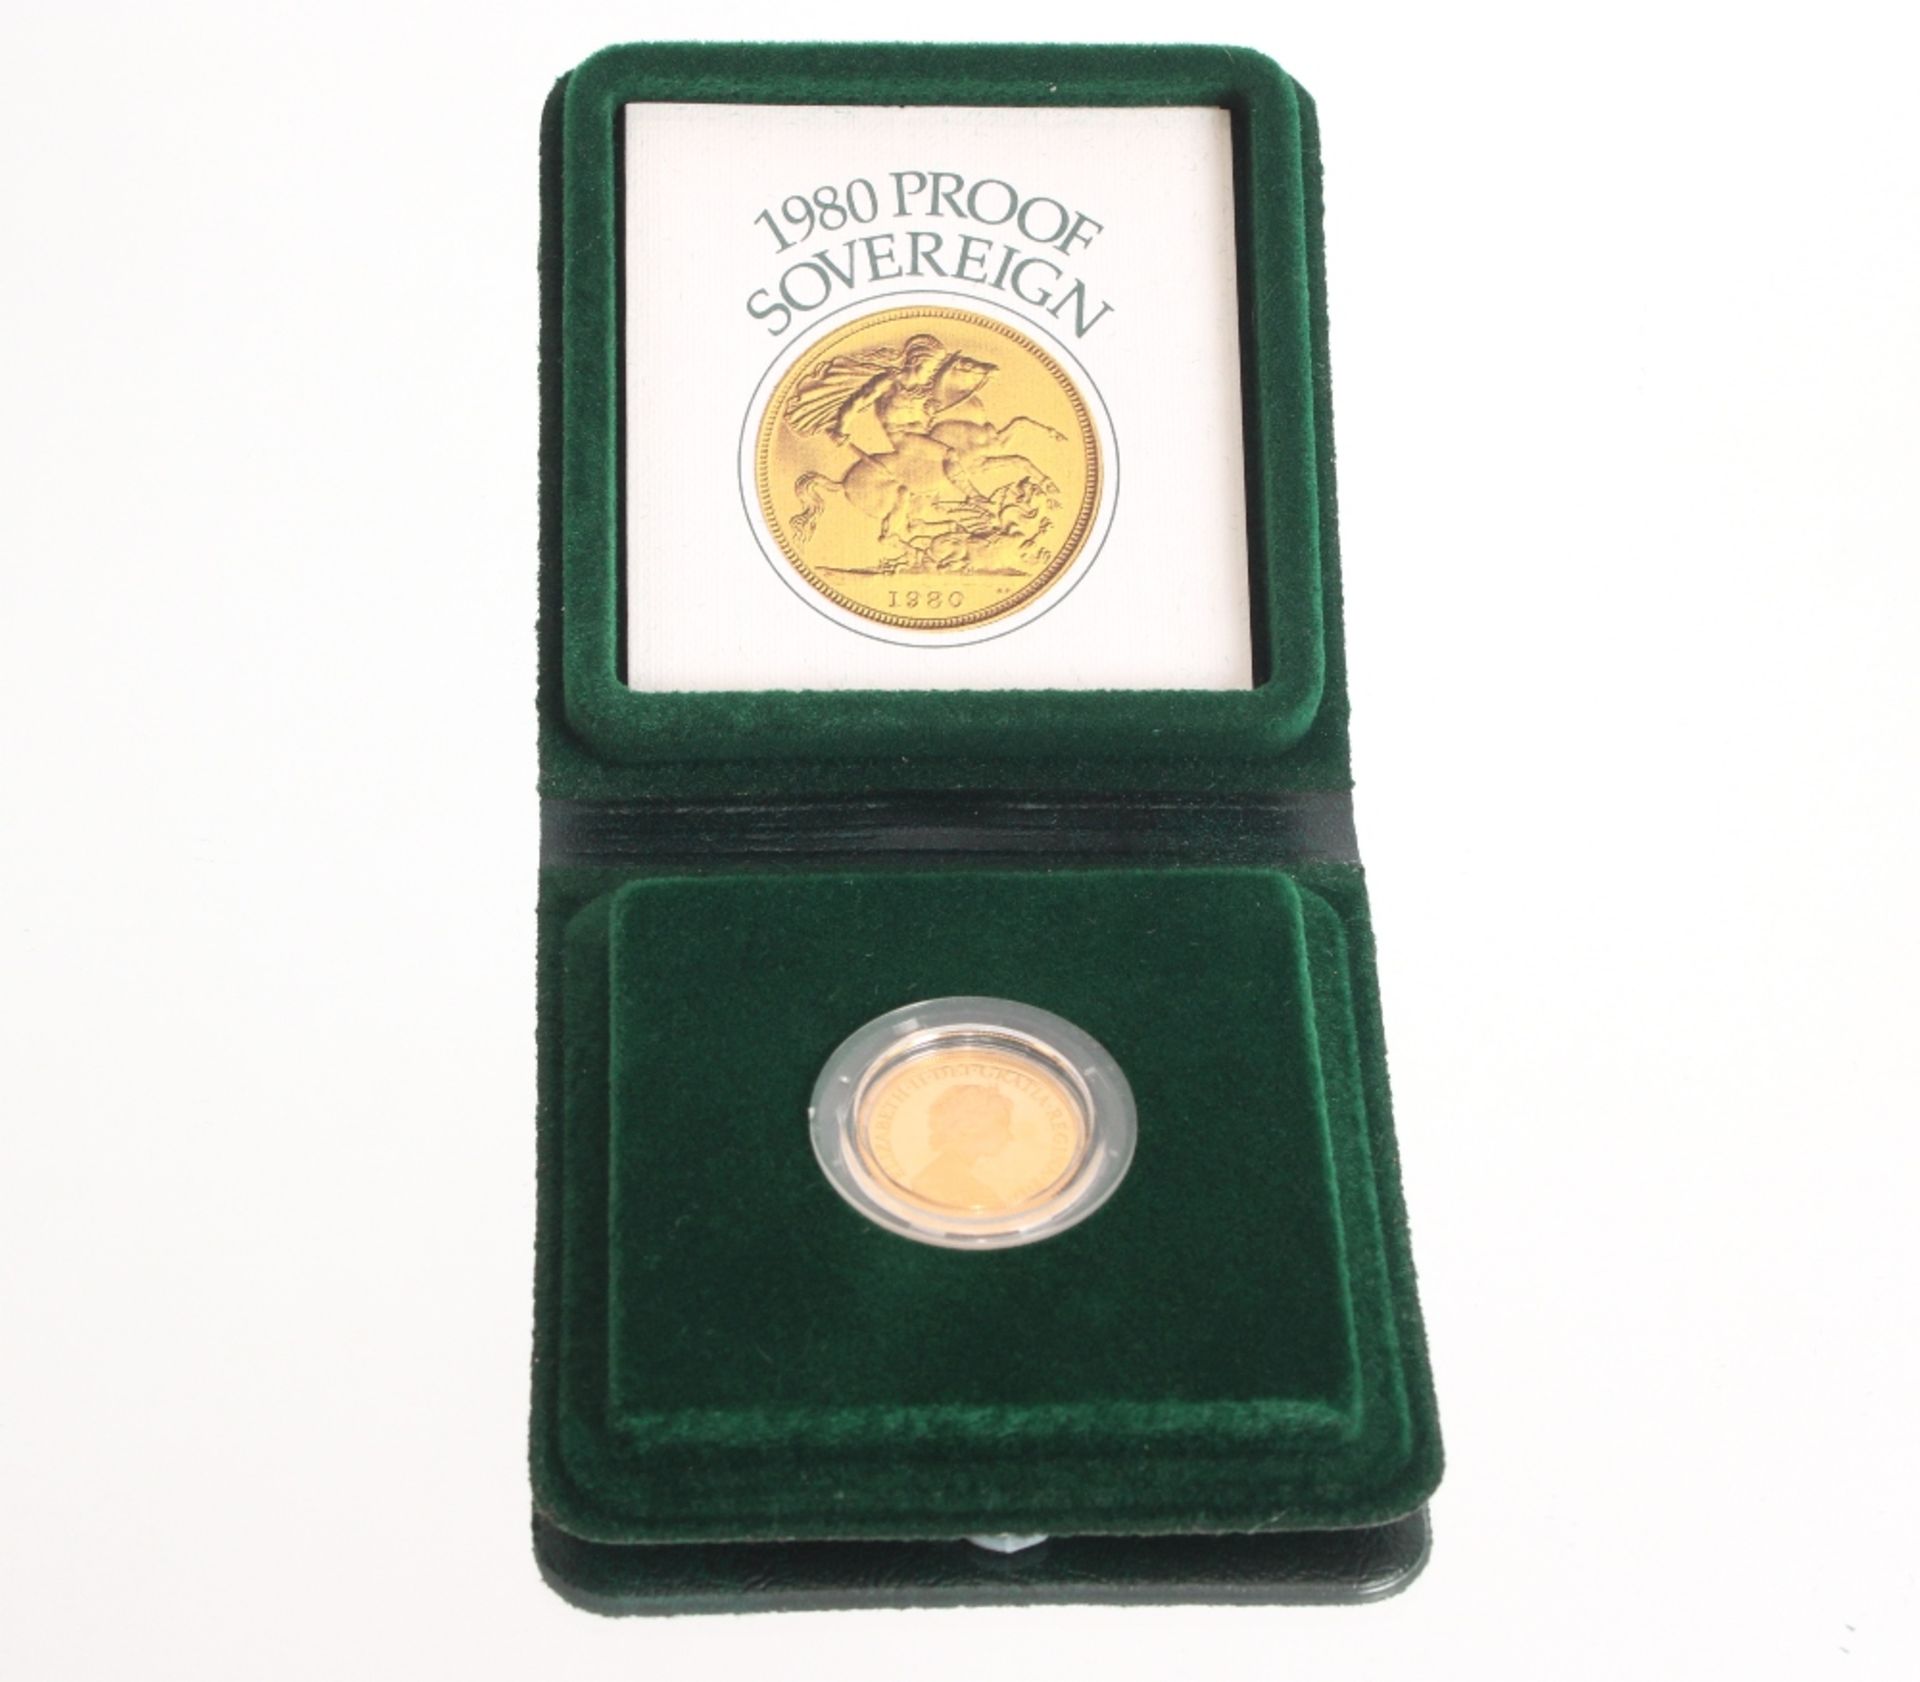 A 1980 proof full Sovereign in fitted case